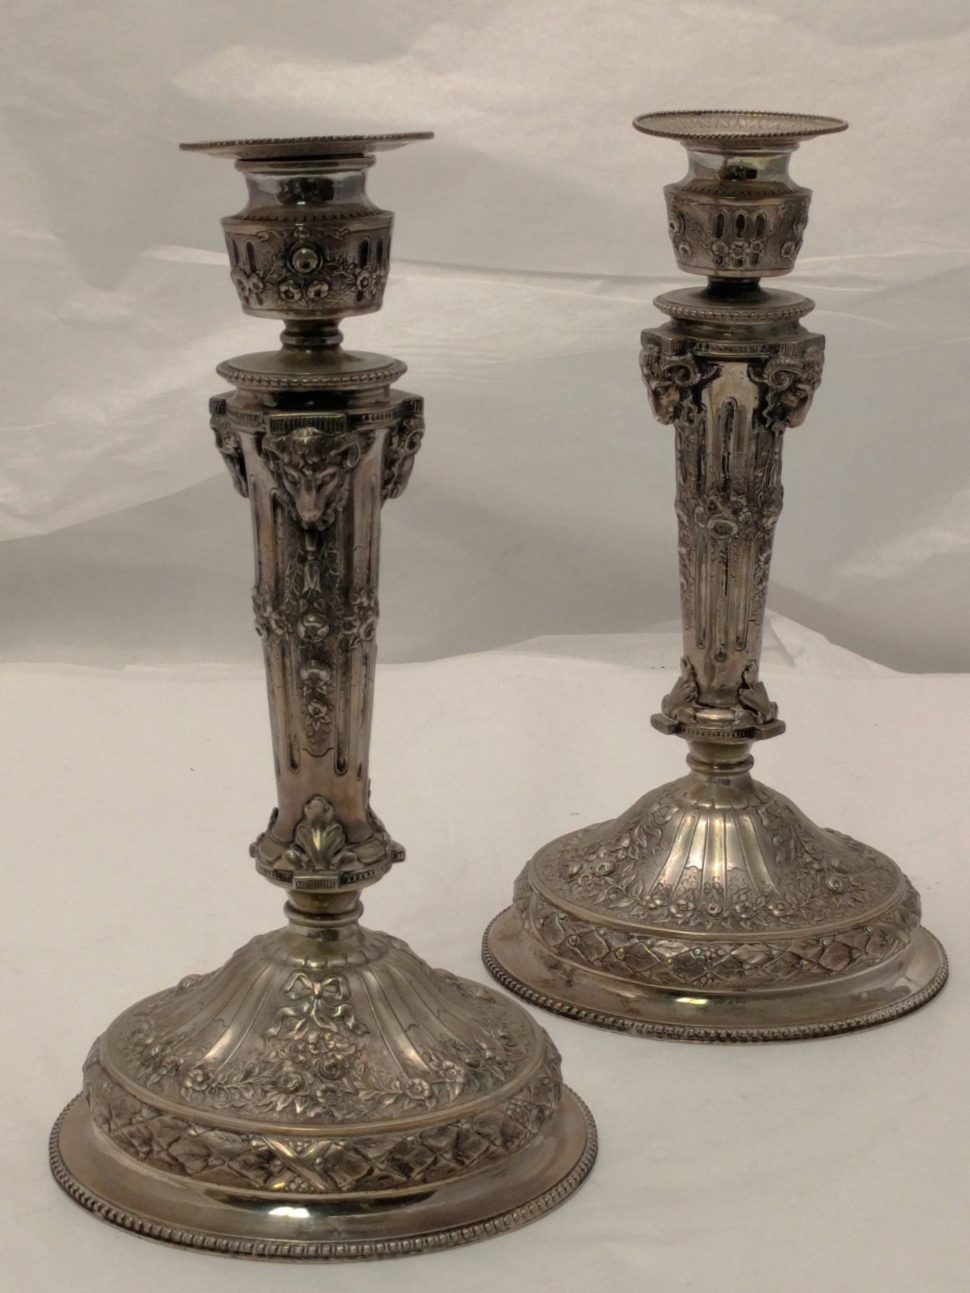 Pair of Silver Candlesticks with Unique Ram Design